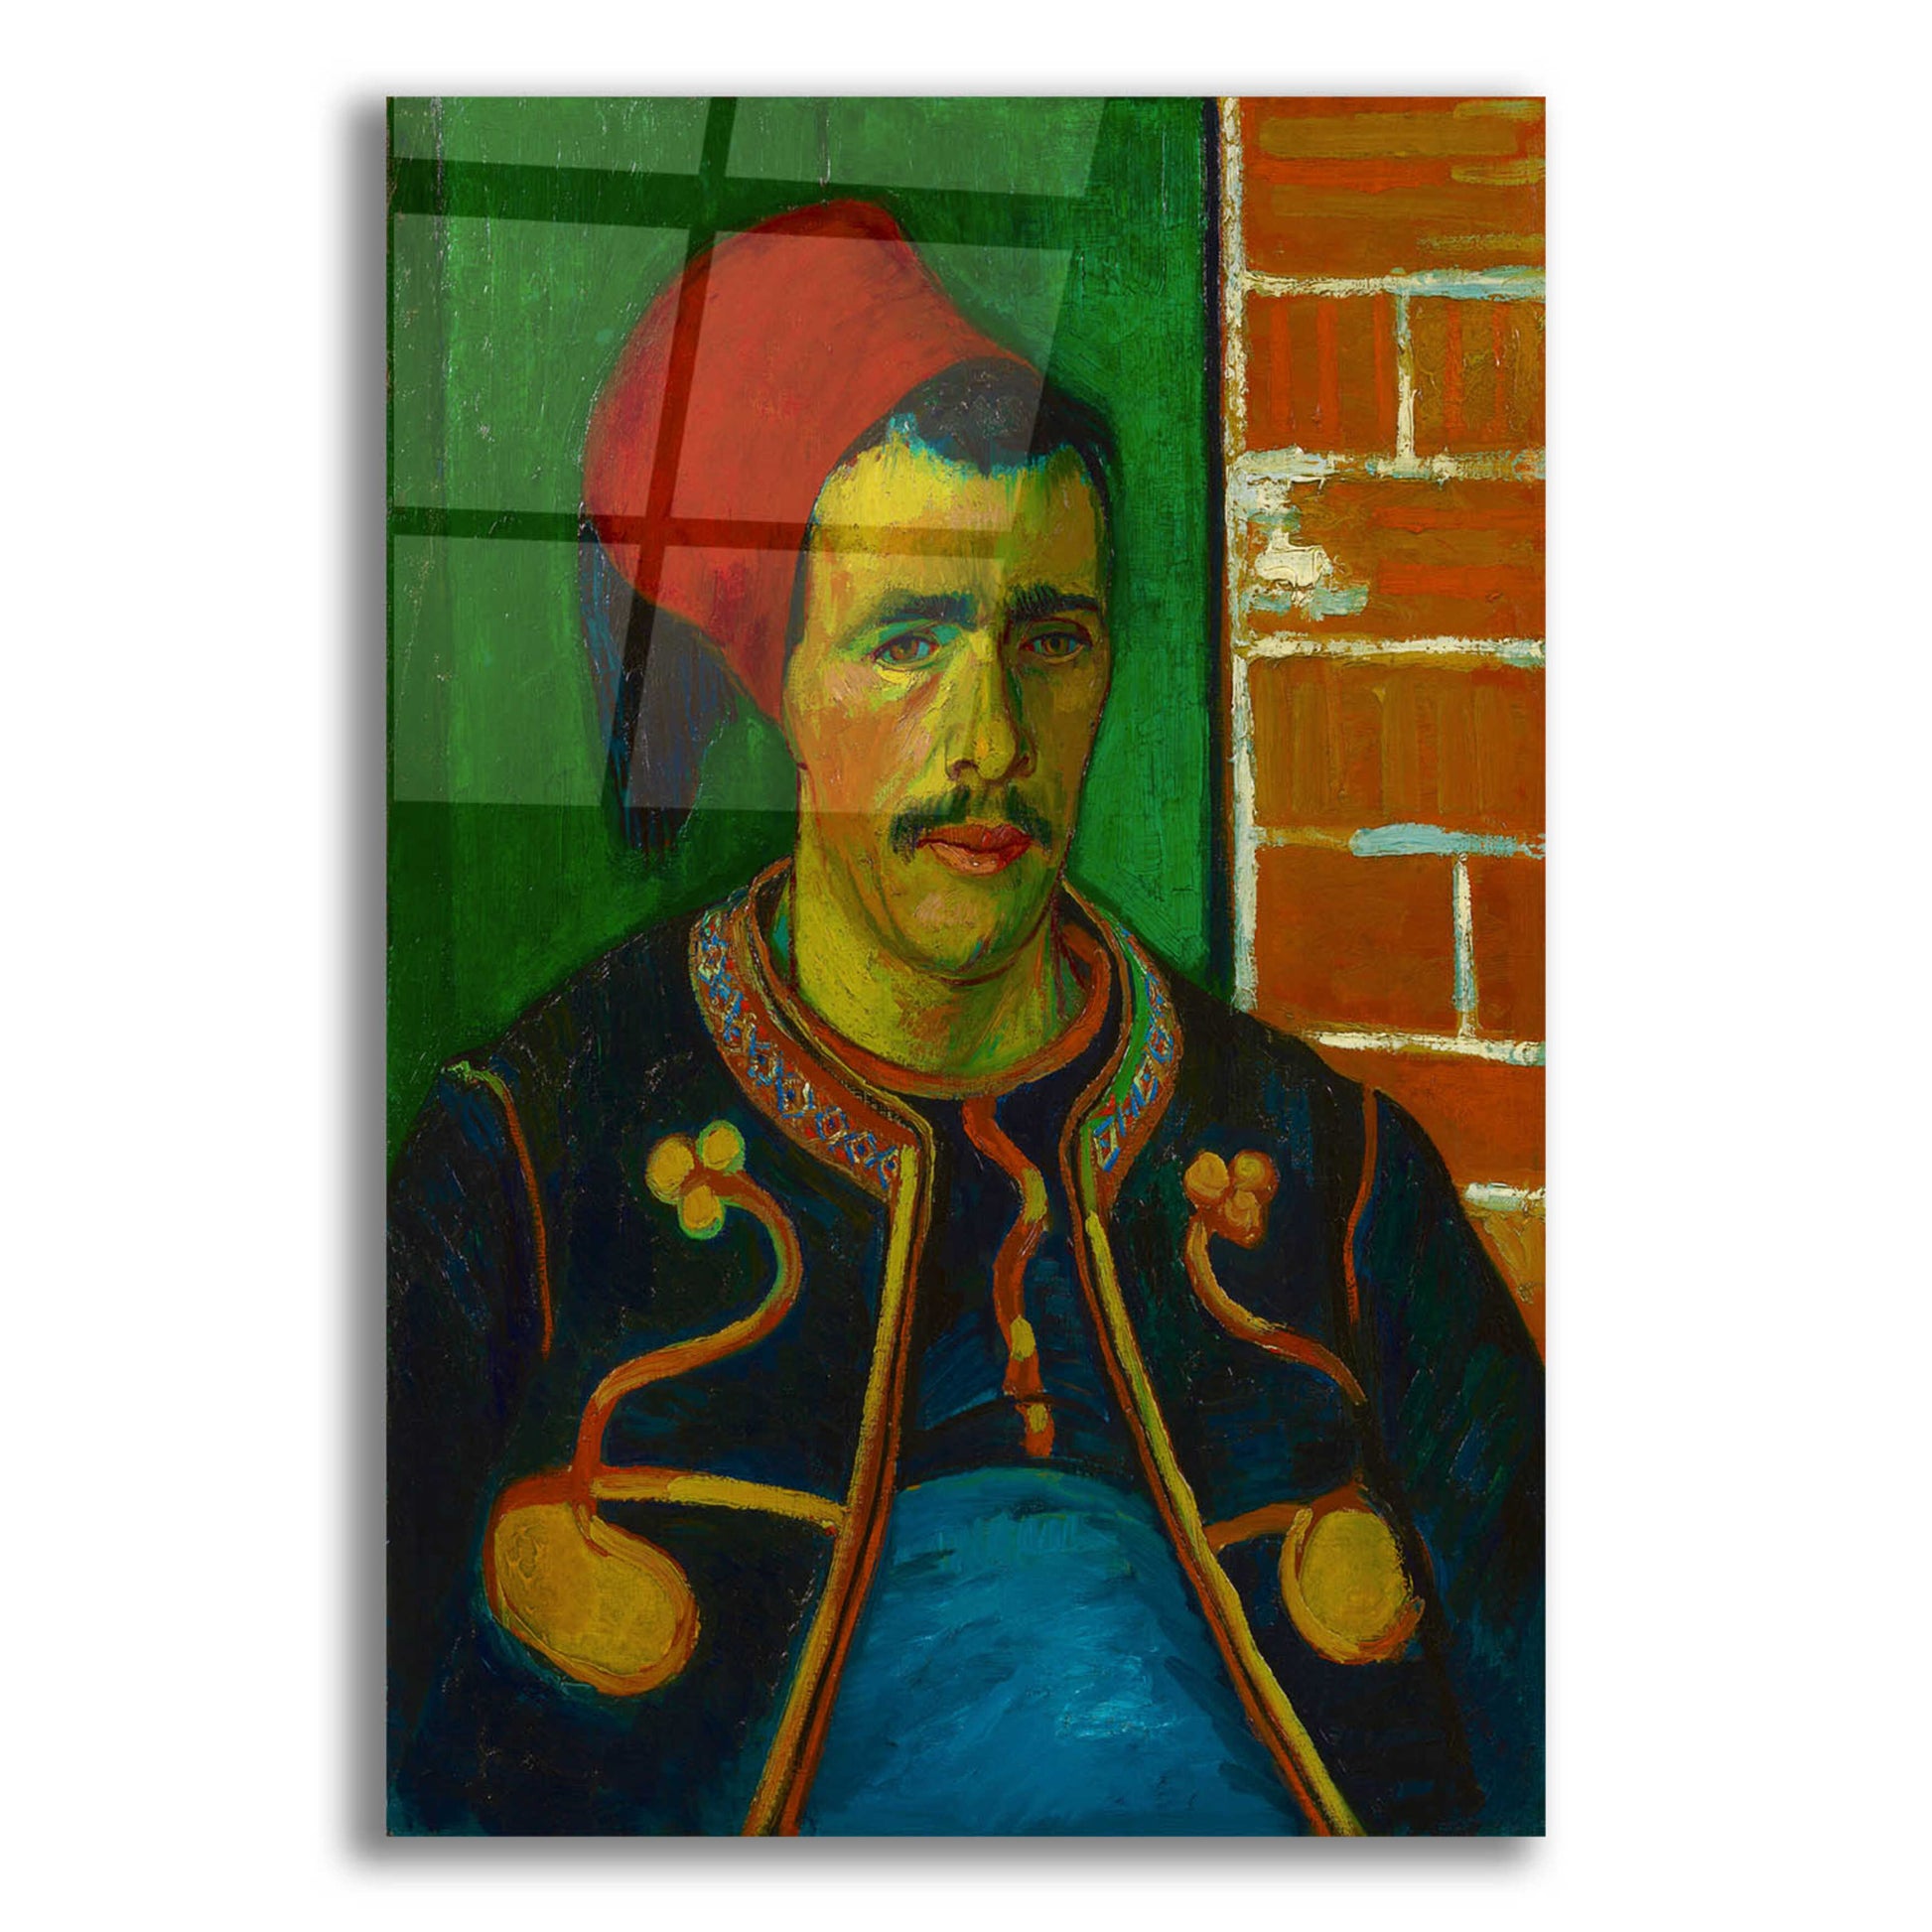 Epic Art 'The Zouave' by Vincent Van Gogh, Acrylic Glass Wall Art,16x24